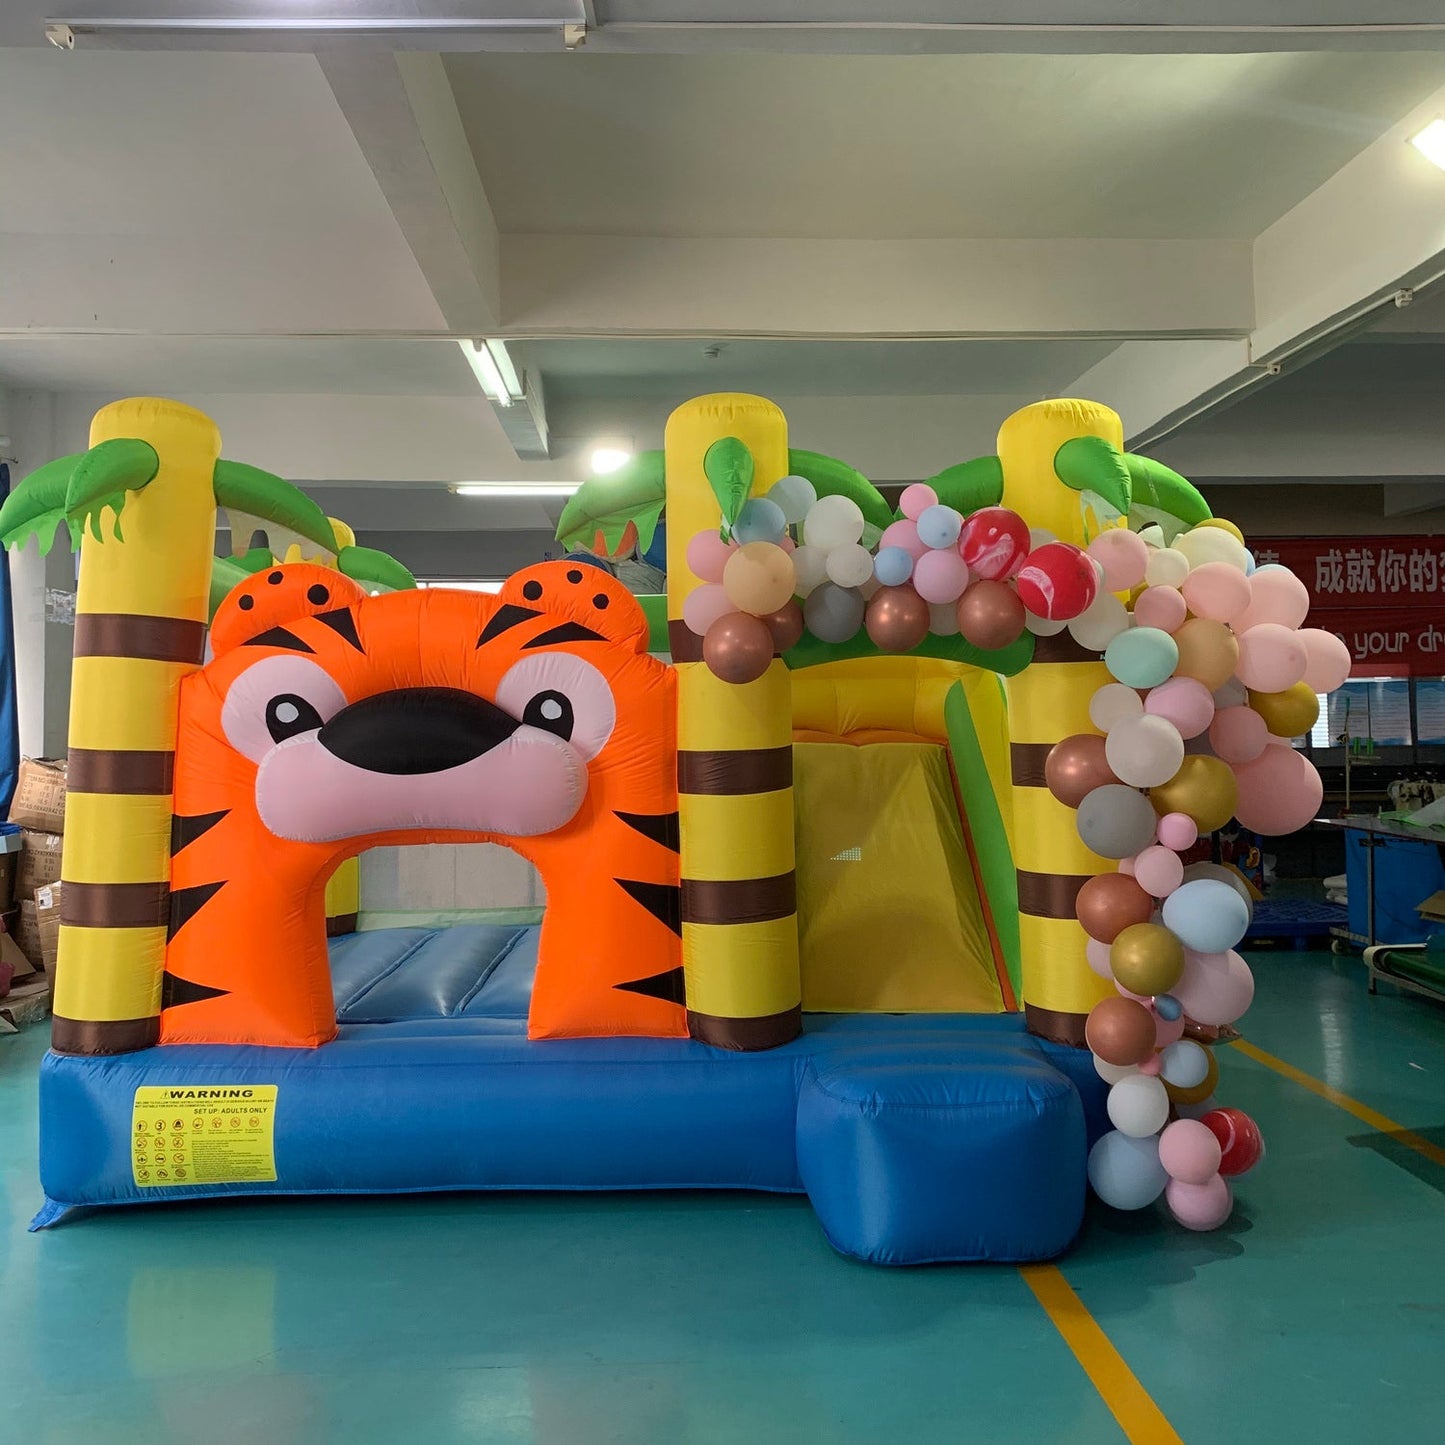 YARD Residential Tiger Bounce House Slide Inflatable Bouncer with Blower